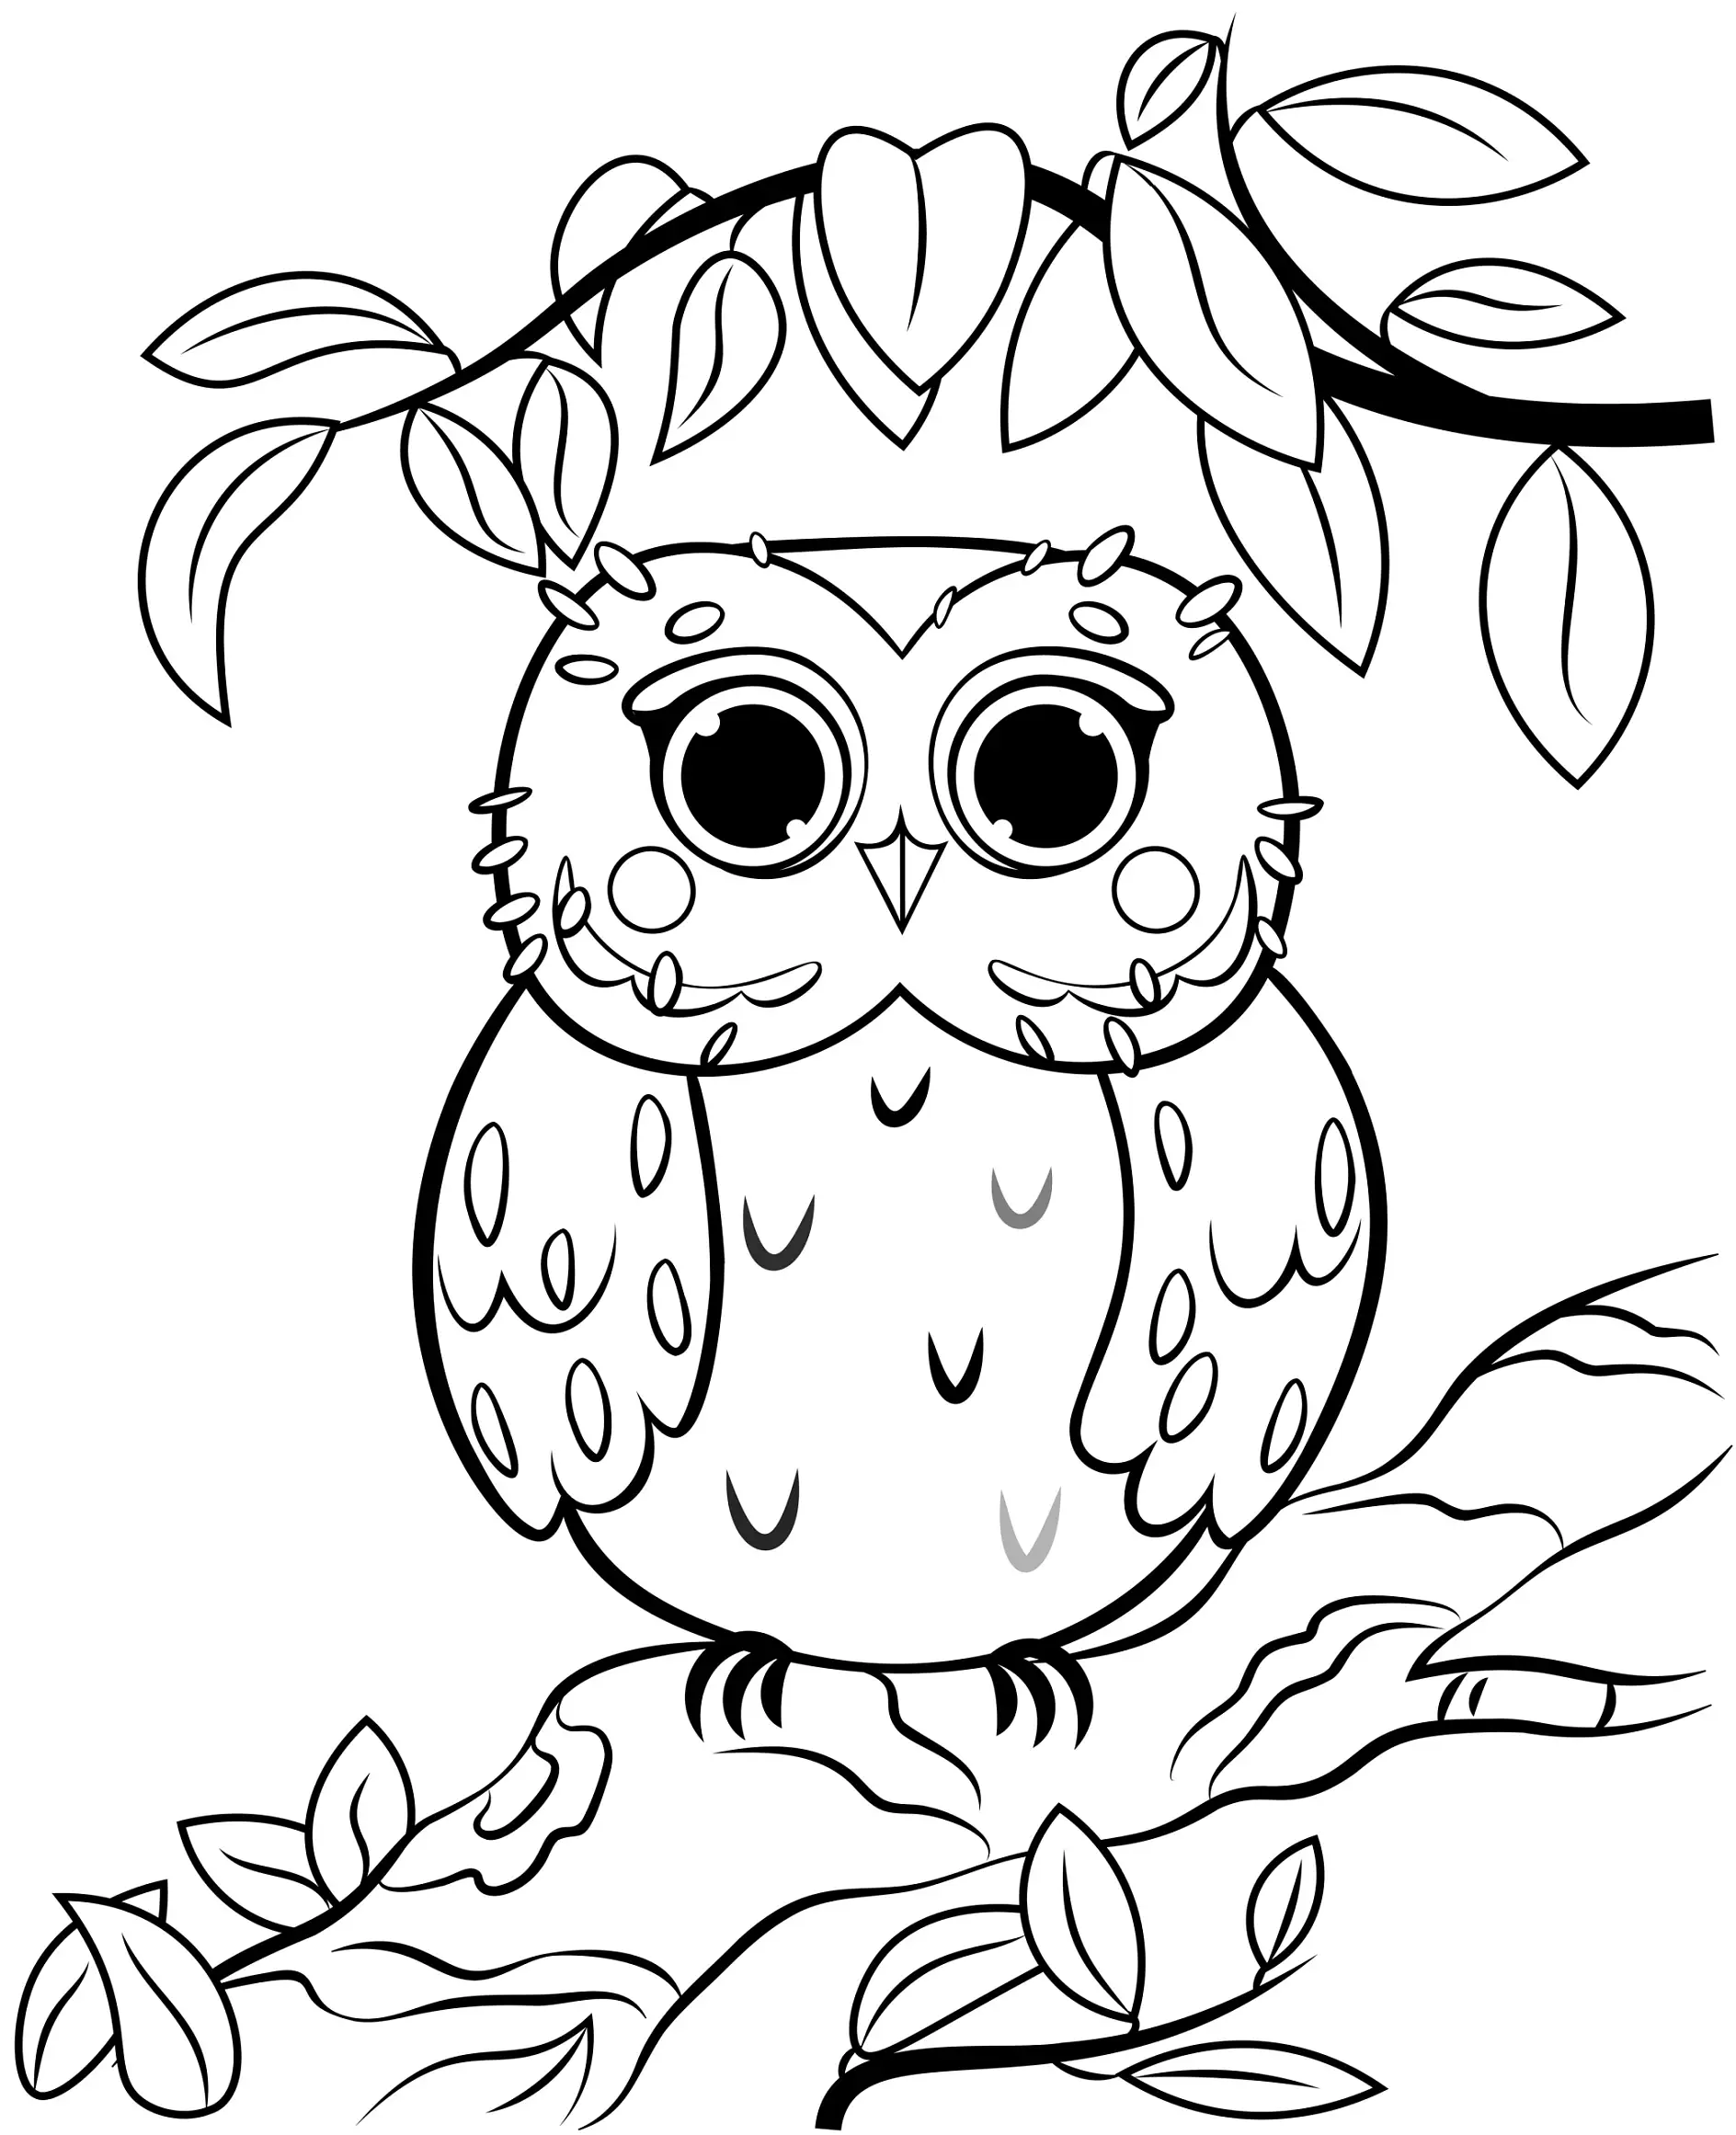 Ausmalbild Eule mit großen Augen unter BlätterdachPrintable coloring page outline of cute cartoon owl on a tree branch. Vector image with nature background. Coloring book of forest wild animals for kids.